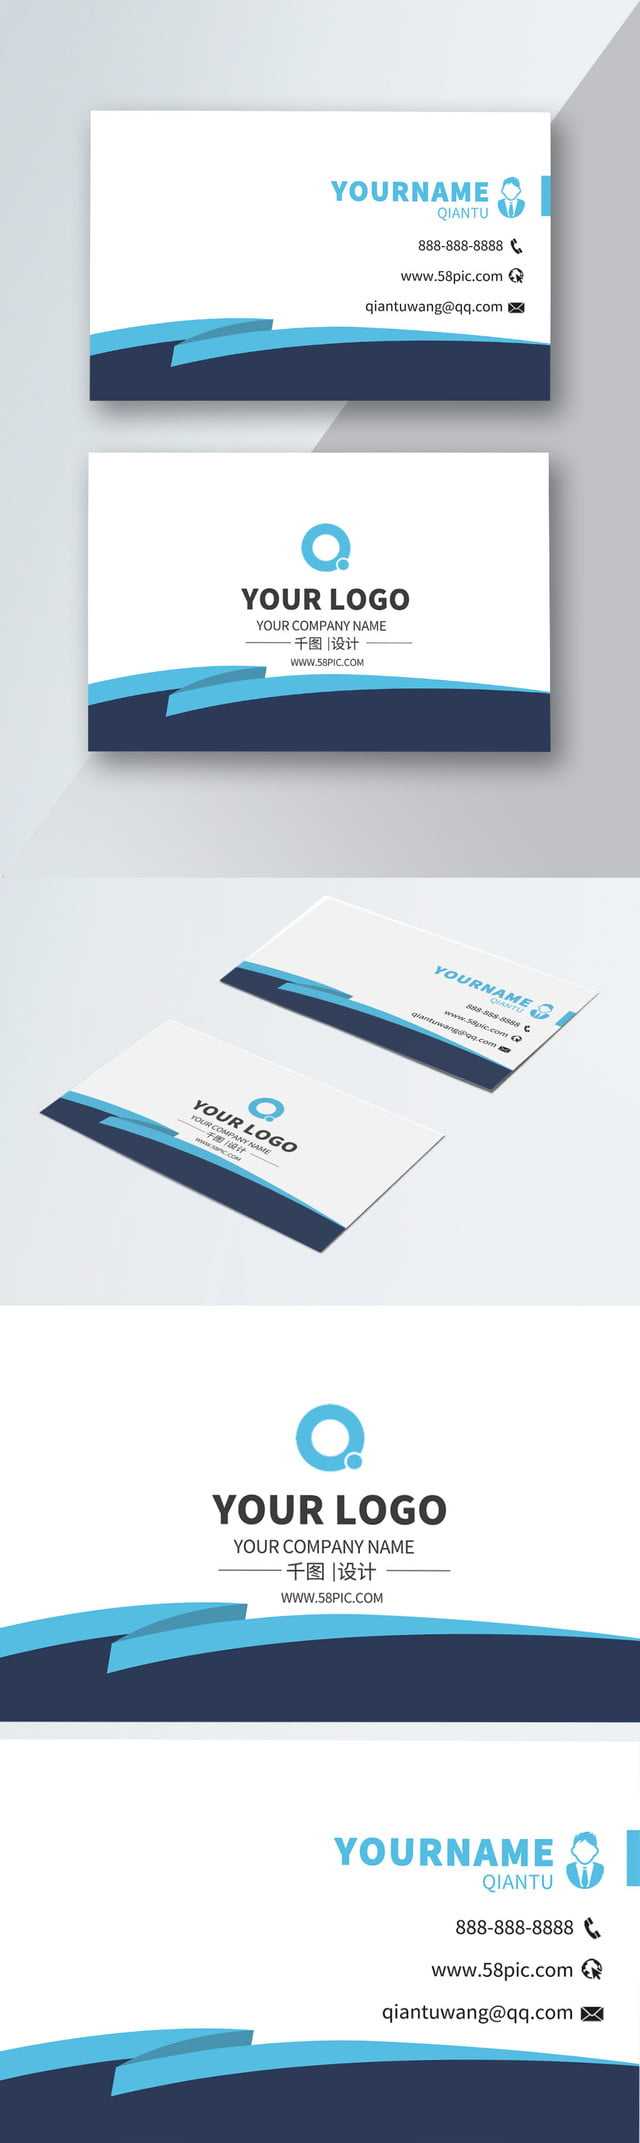 Advertising Company Business Card Material Download Throughout Advertising Card Template